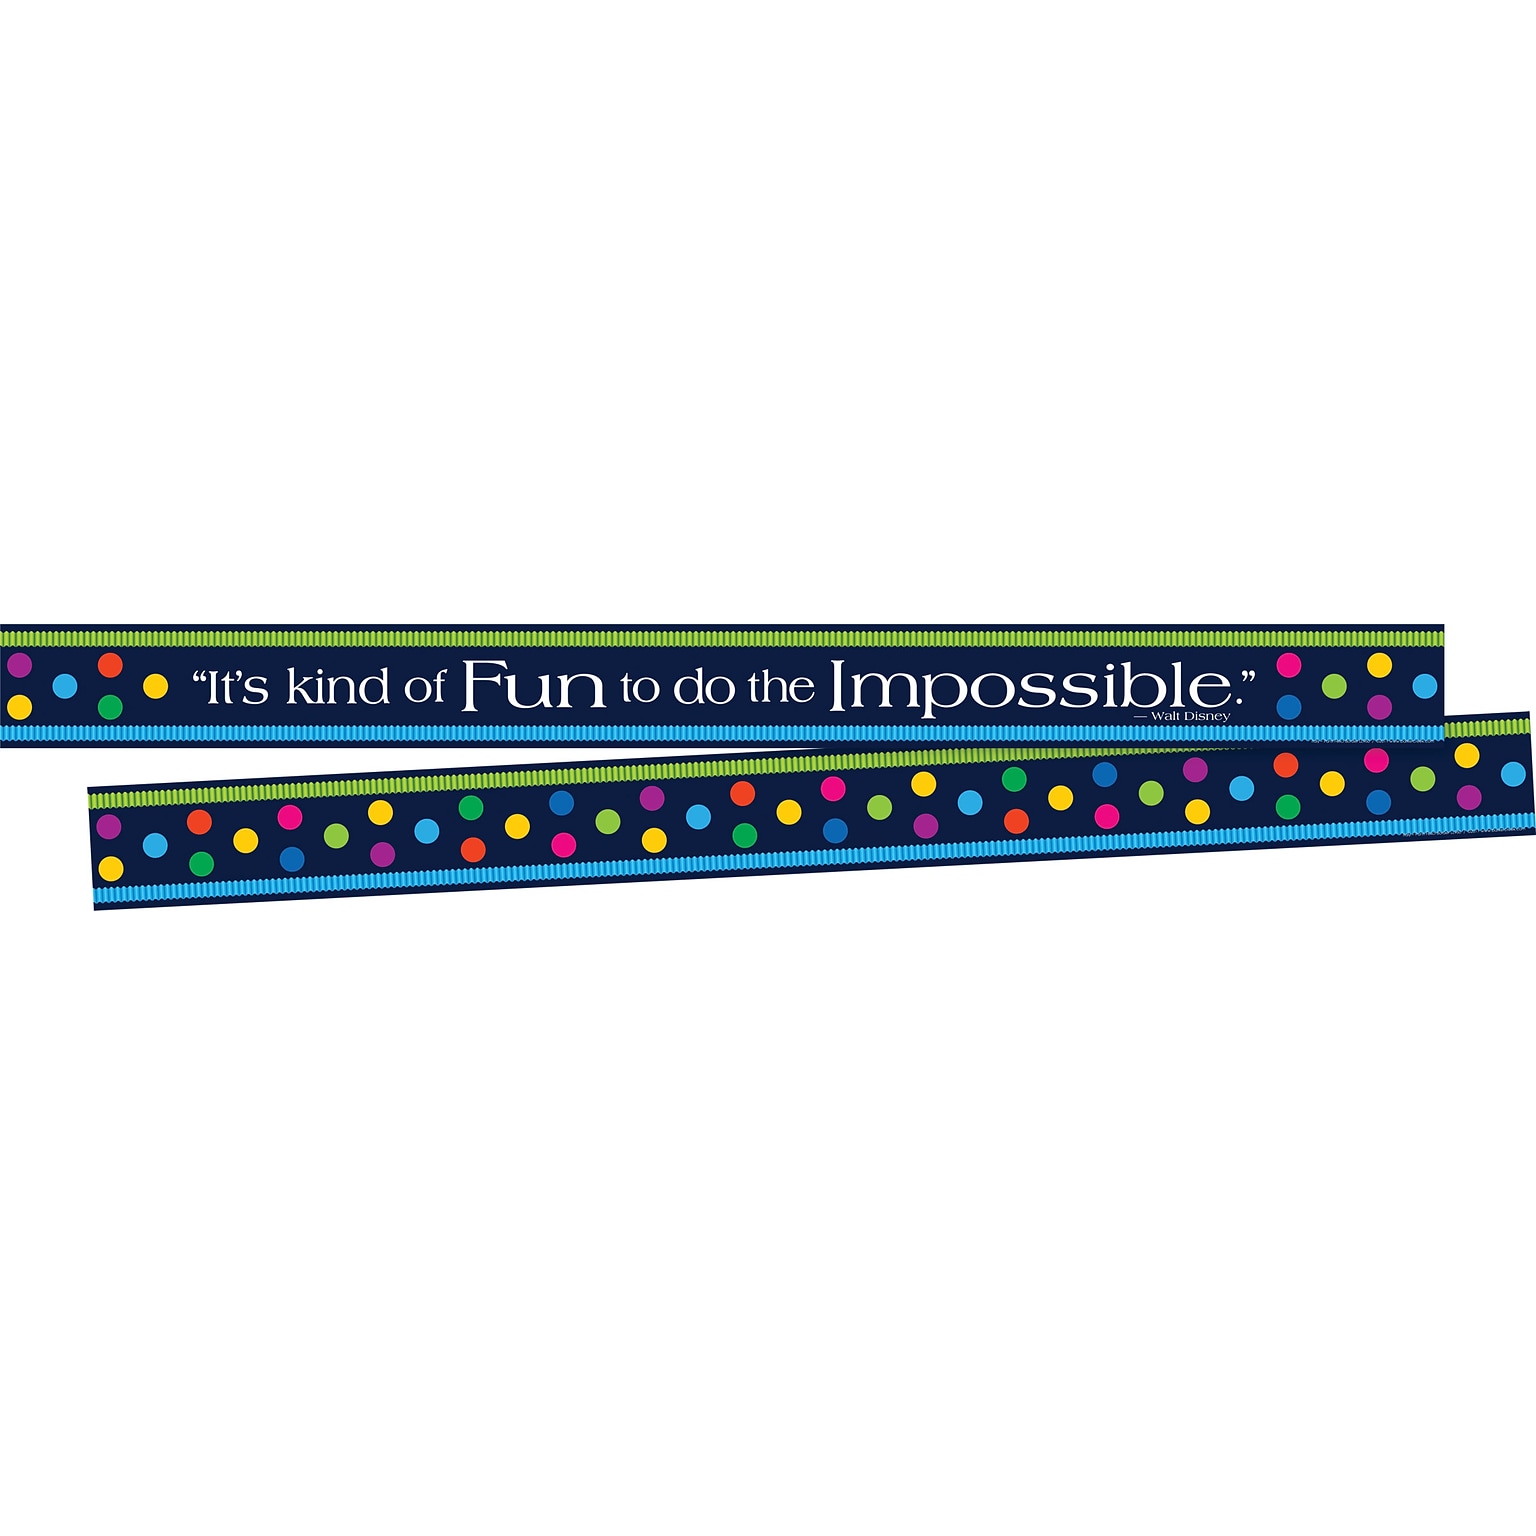 Barker Creek Italy Punti Felici Double-Sided Border with Quote 2-Pack, 70 Feet/Set (BC3672)